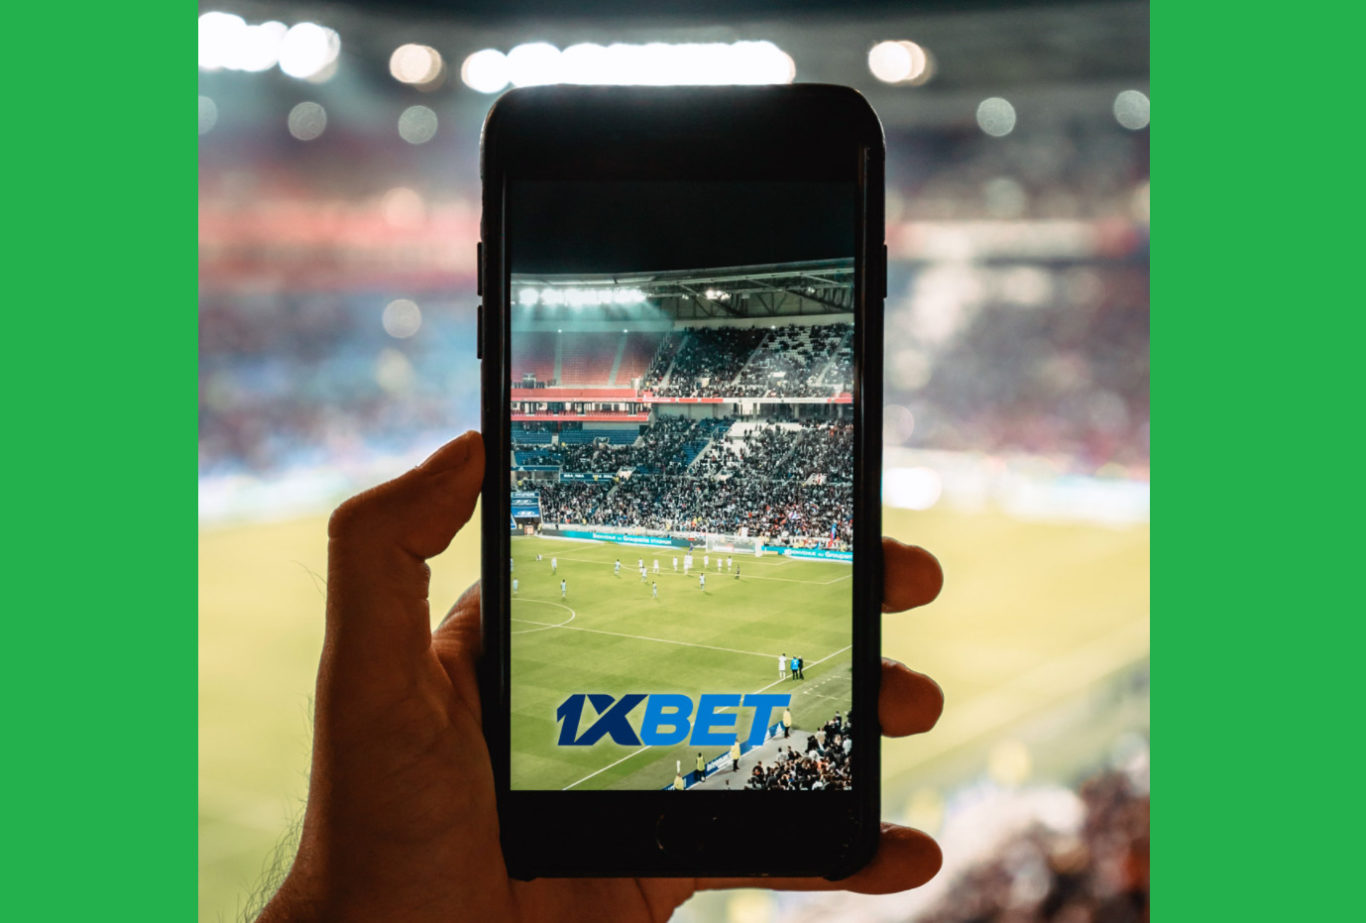 download 1xBet app for iOS India